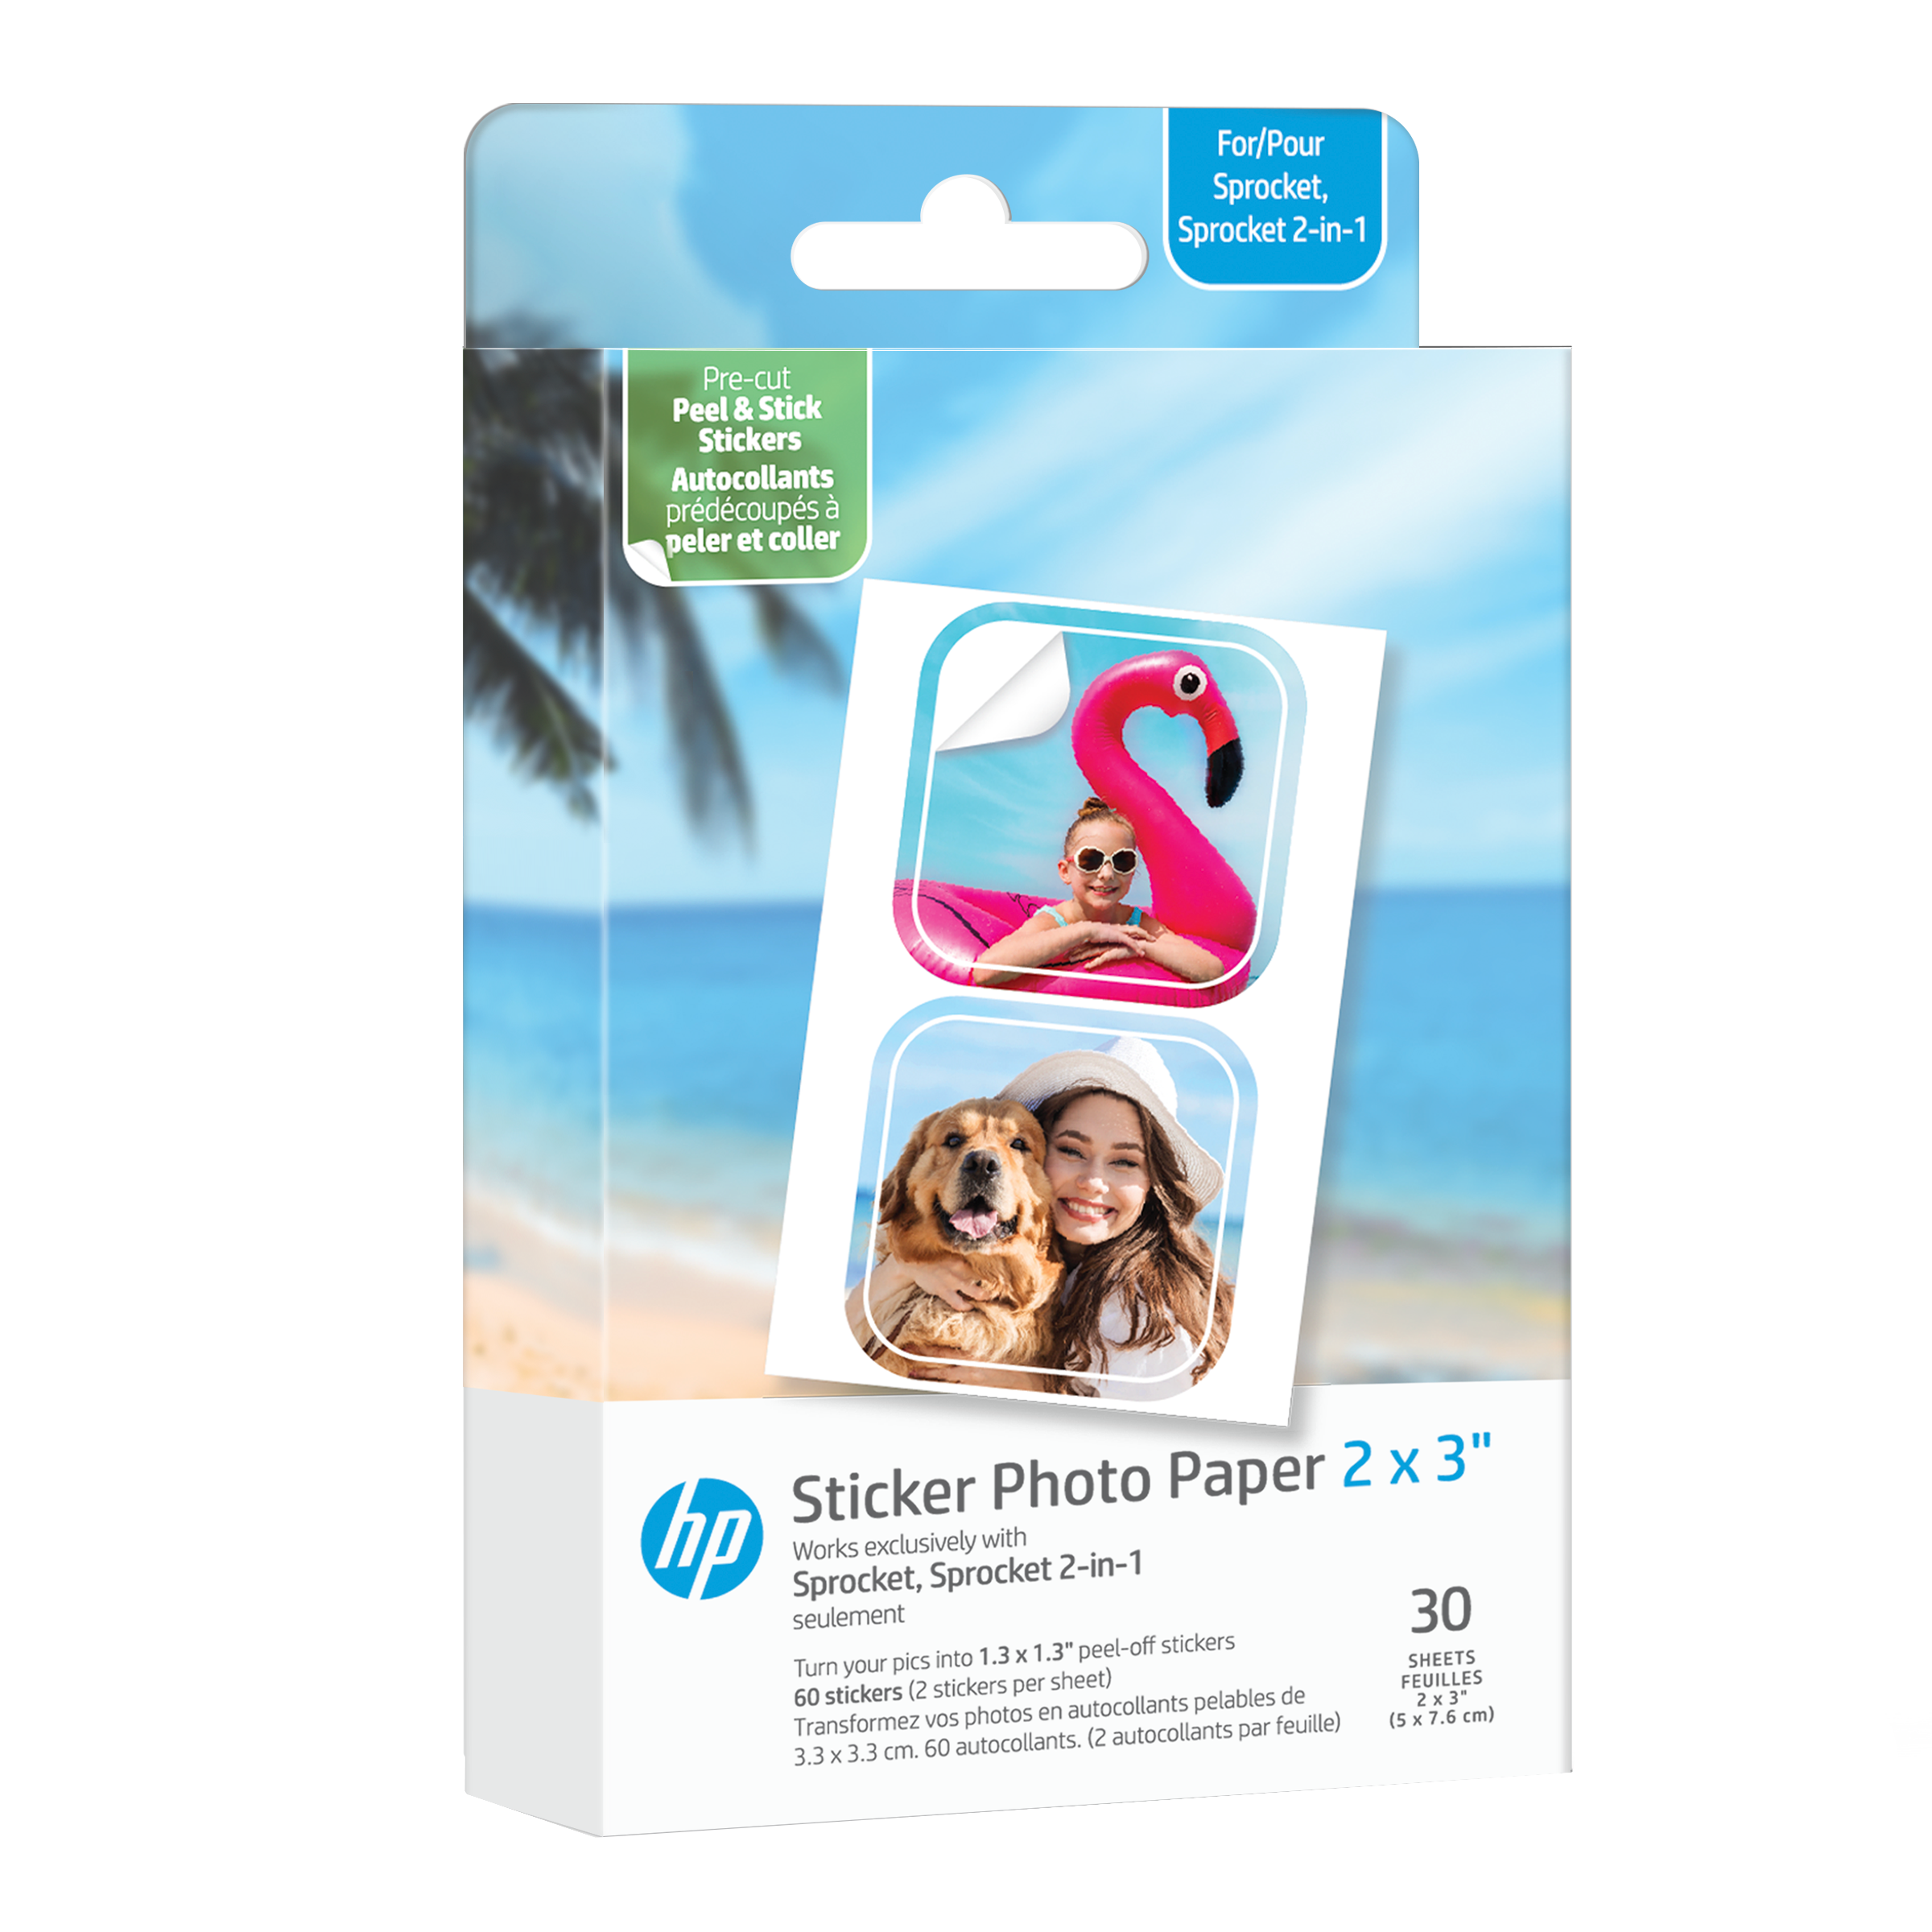 2 Pack HP Sprocket Photo Paper Sheets, Exclusively for HP Sprocket